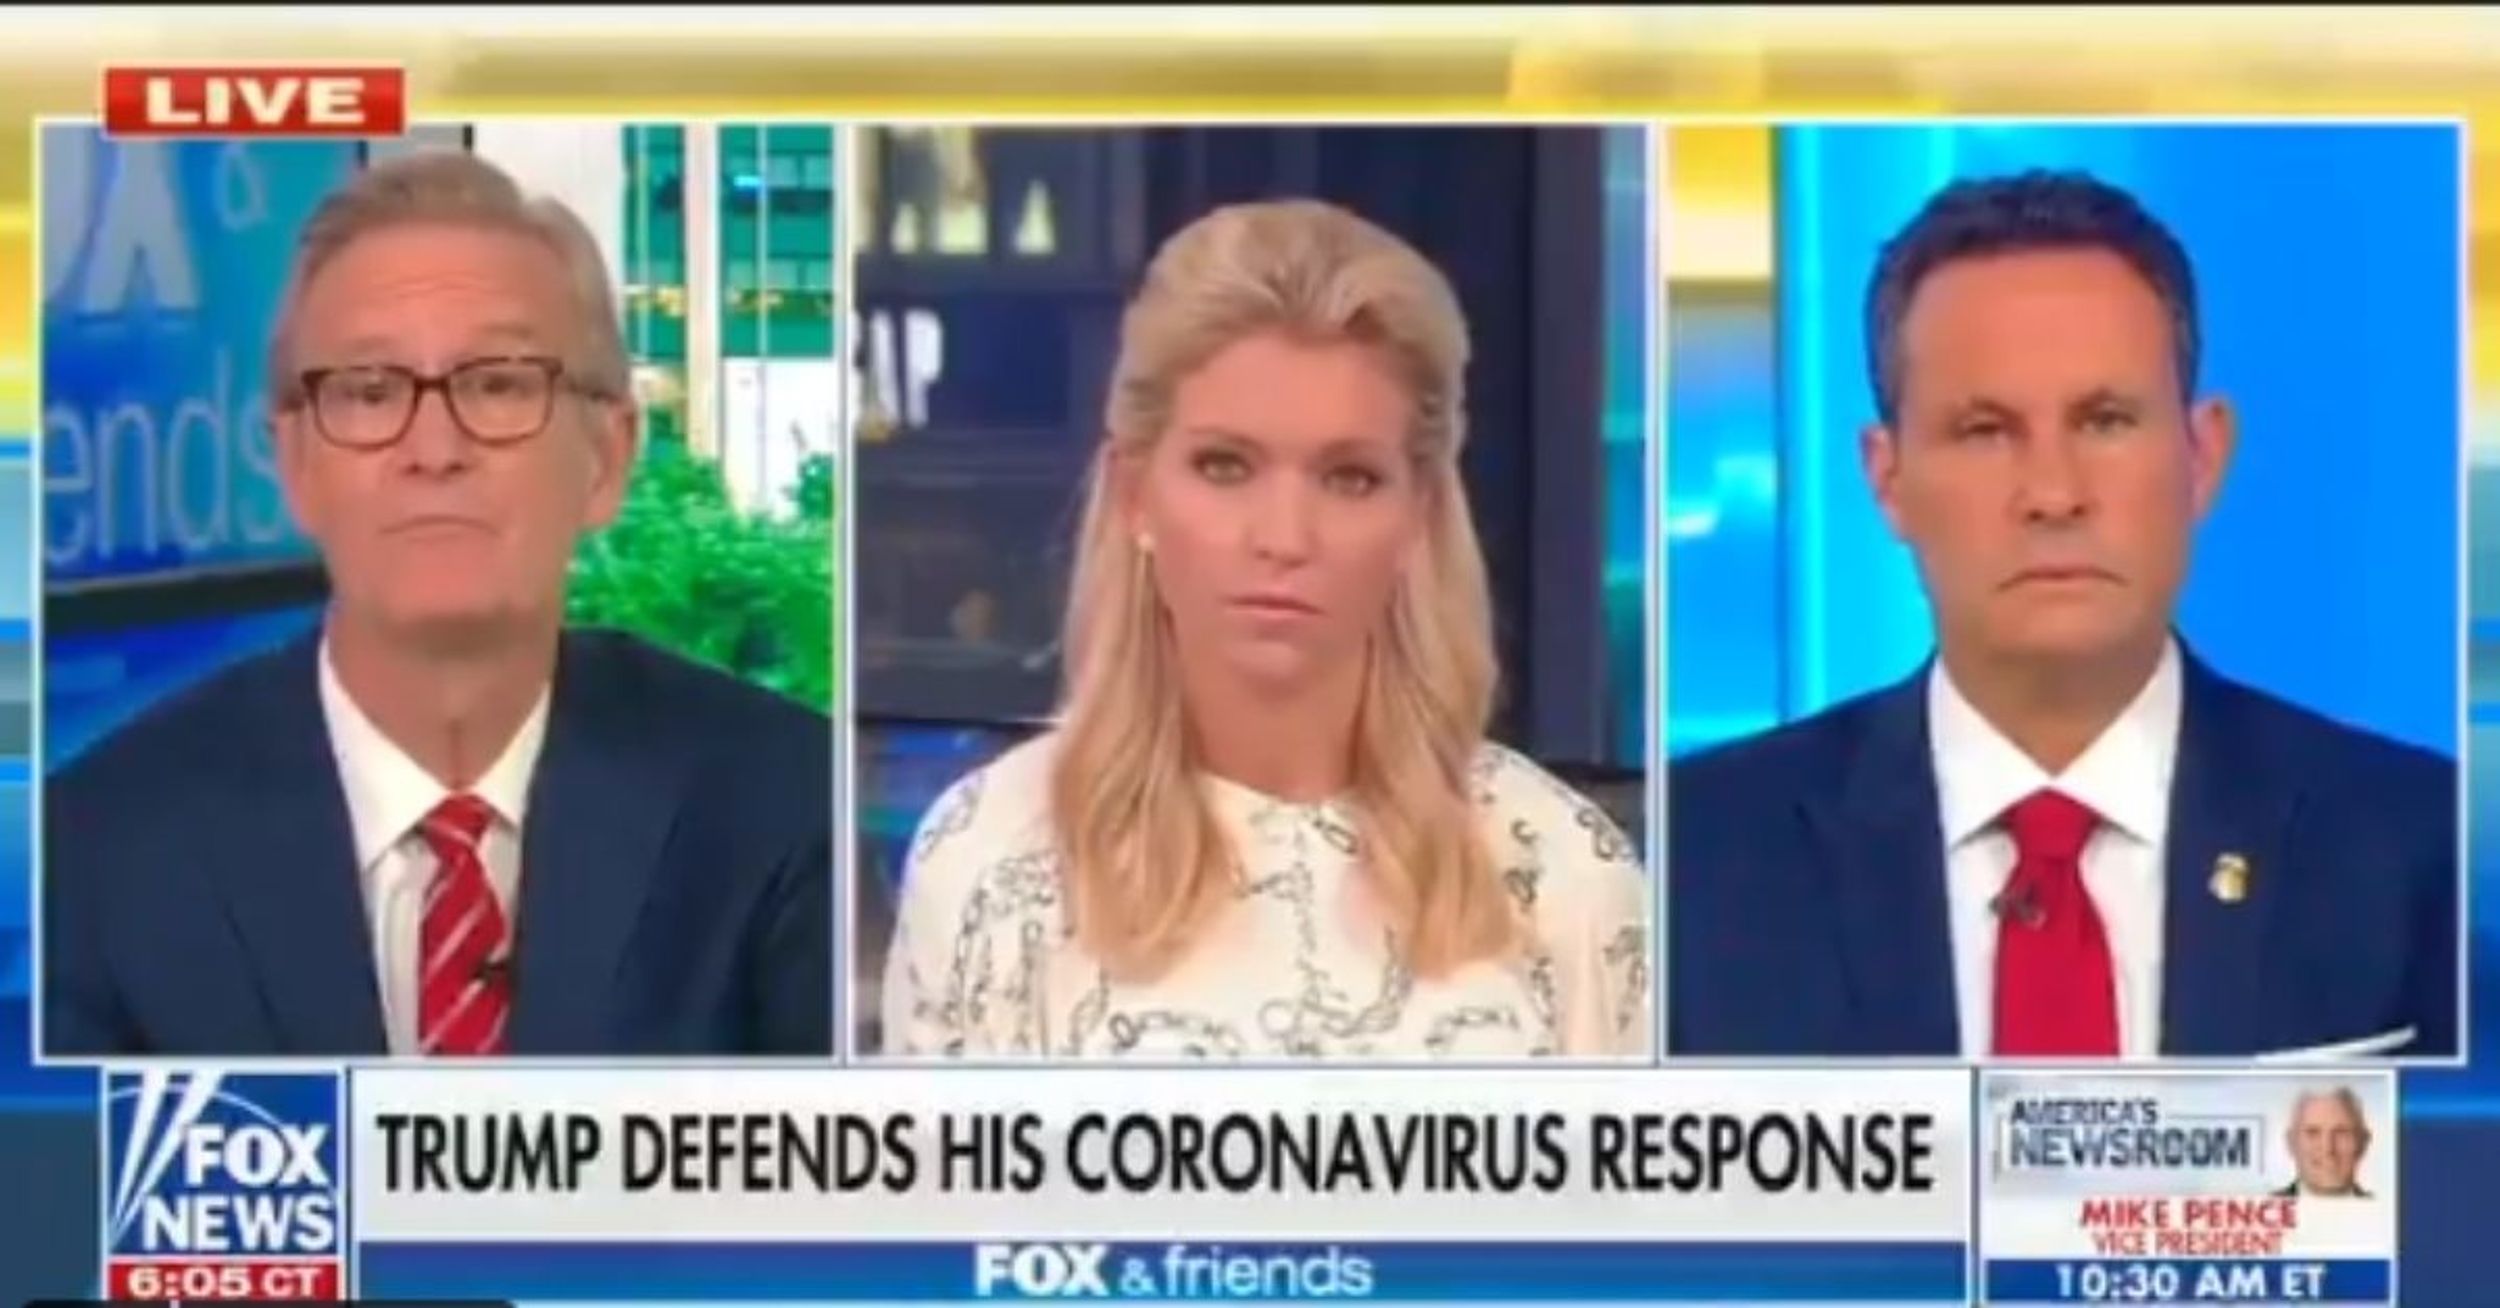 'Fox & Friends' Host Absurdly Compares Trump Lying About Pandemic To FDR's Fireside Chats